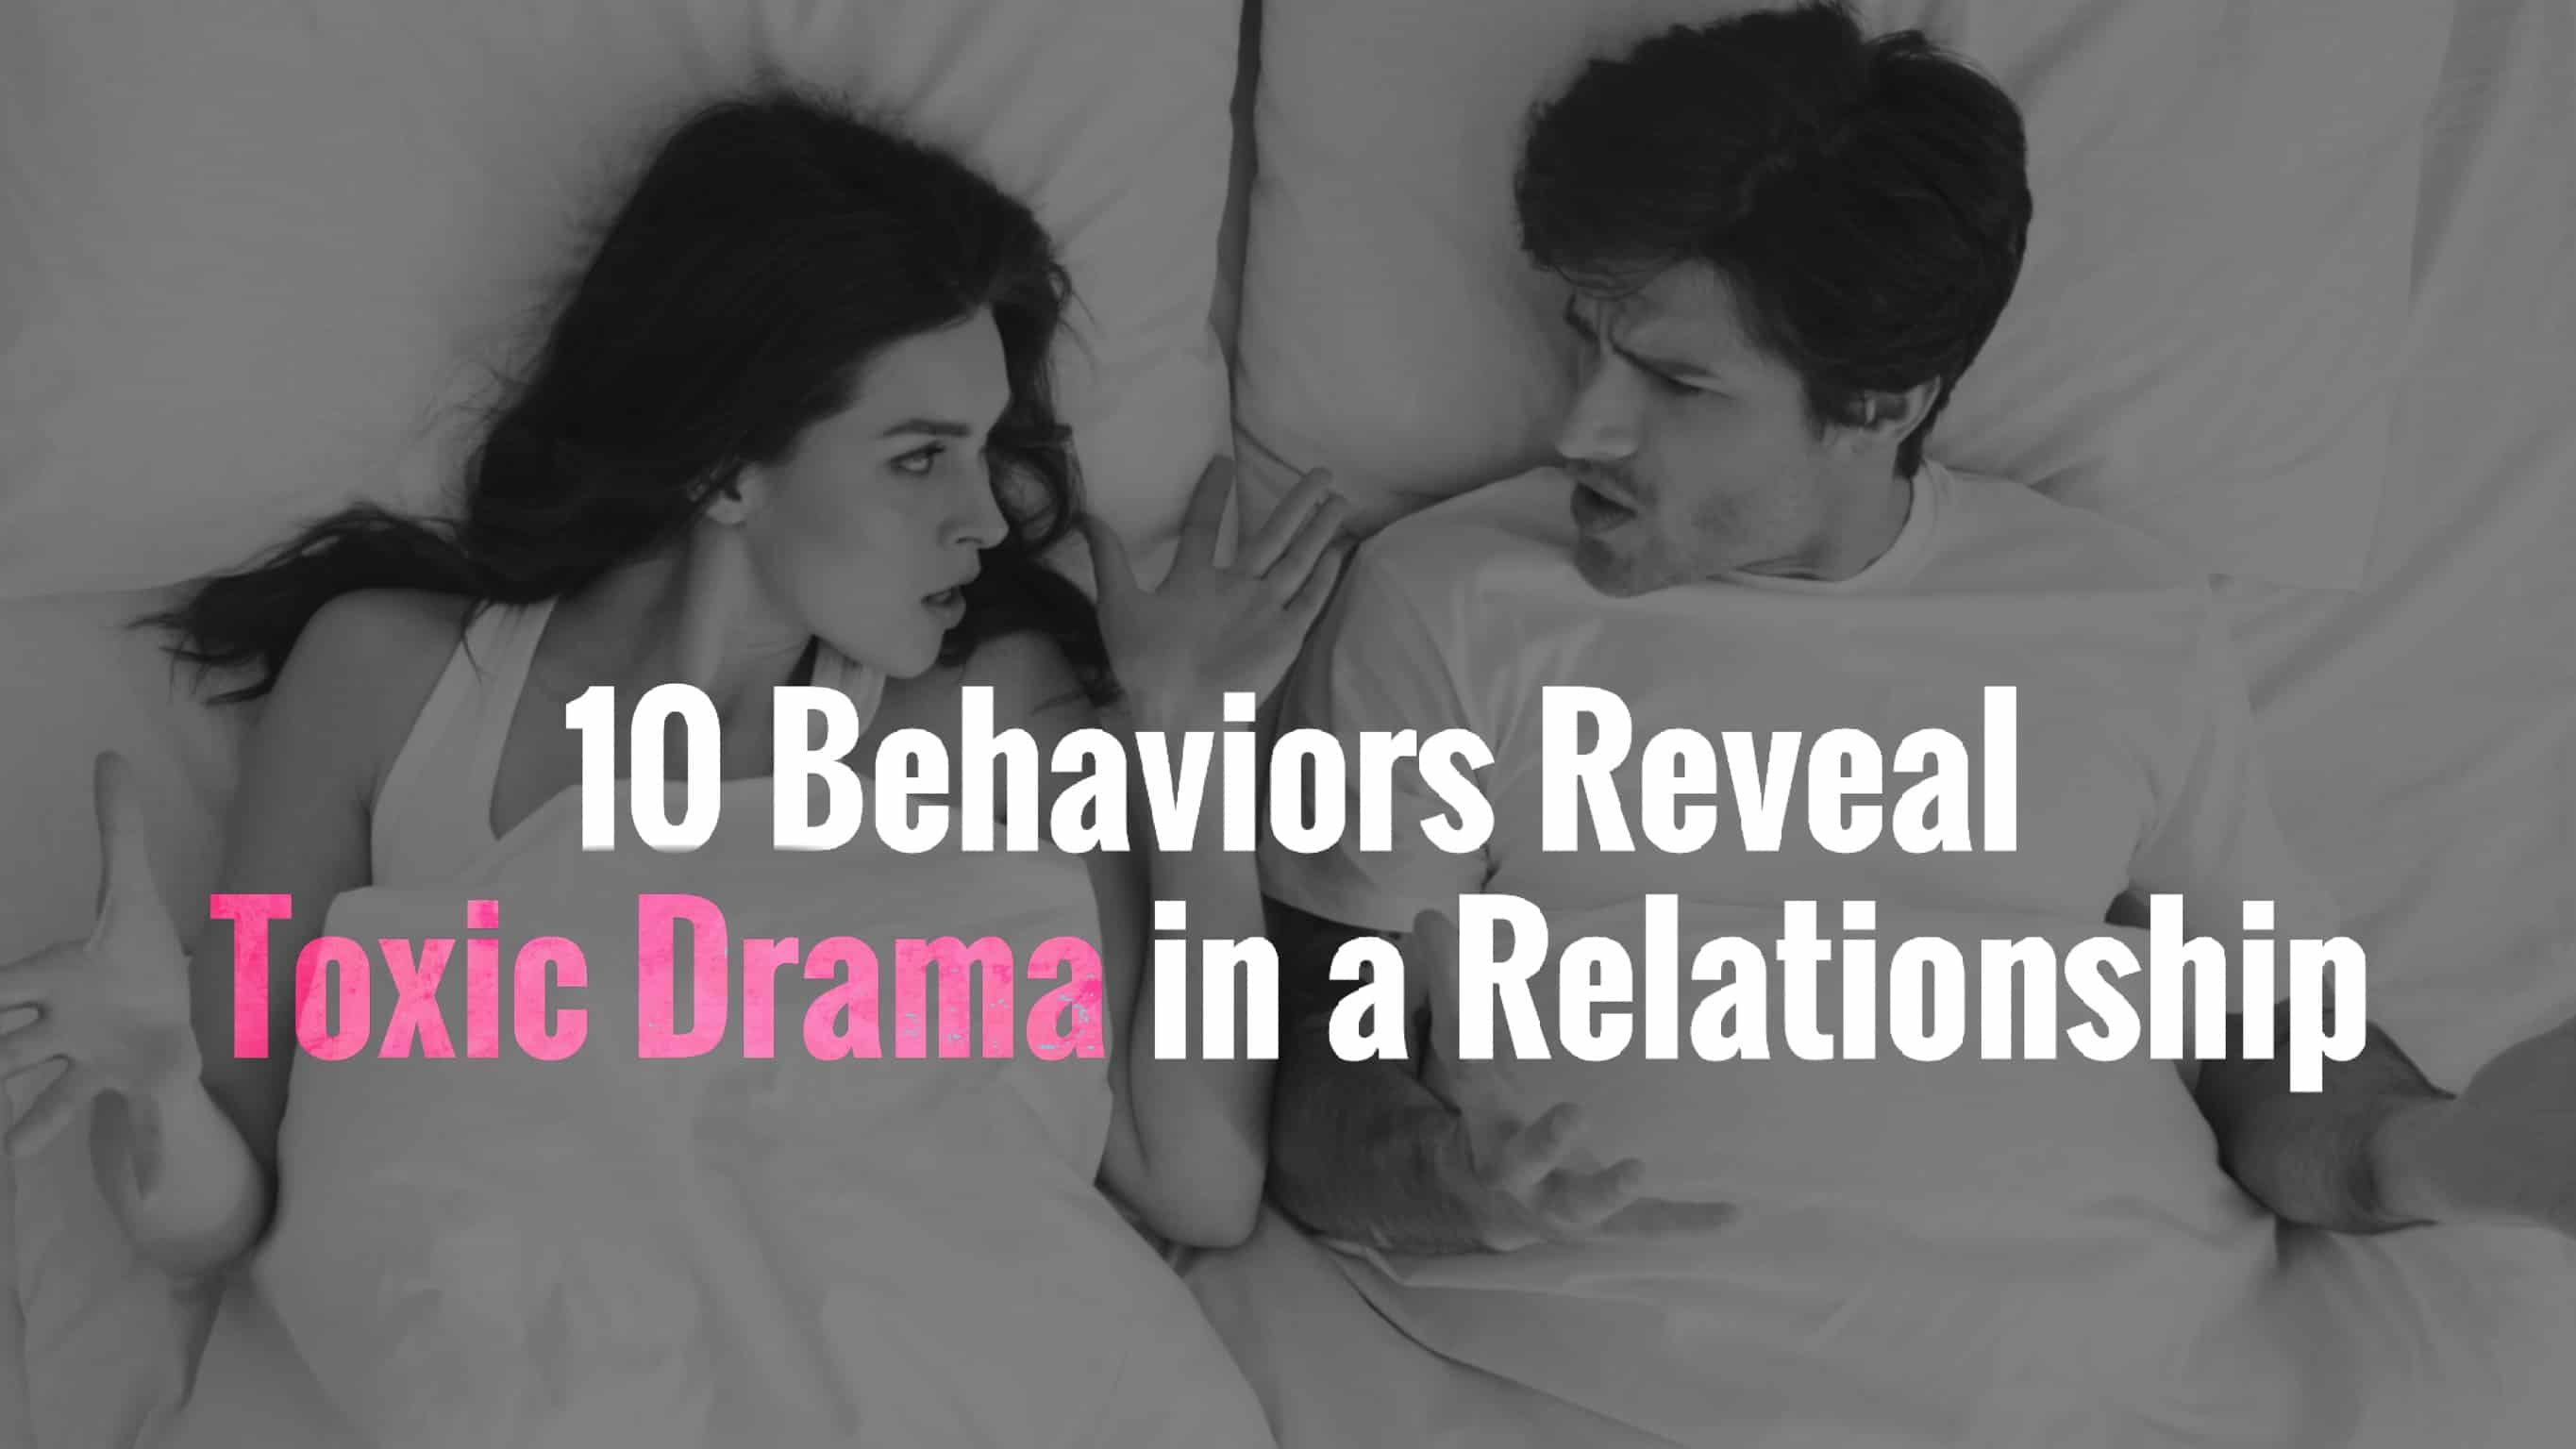 10 Behaviors Reveal Toxic Drama in a Relationship